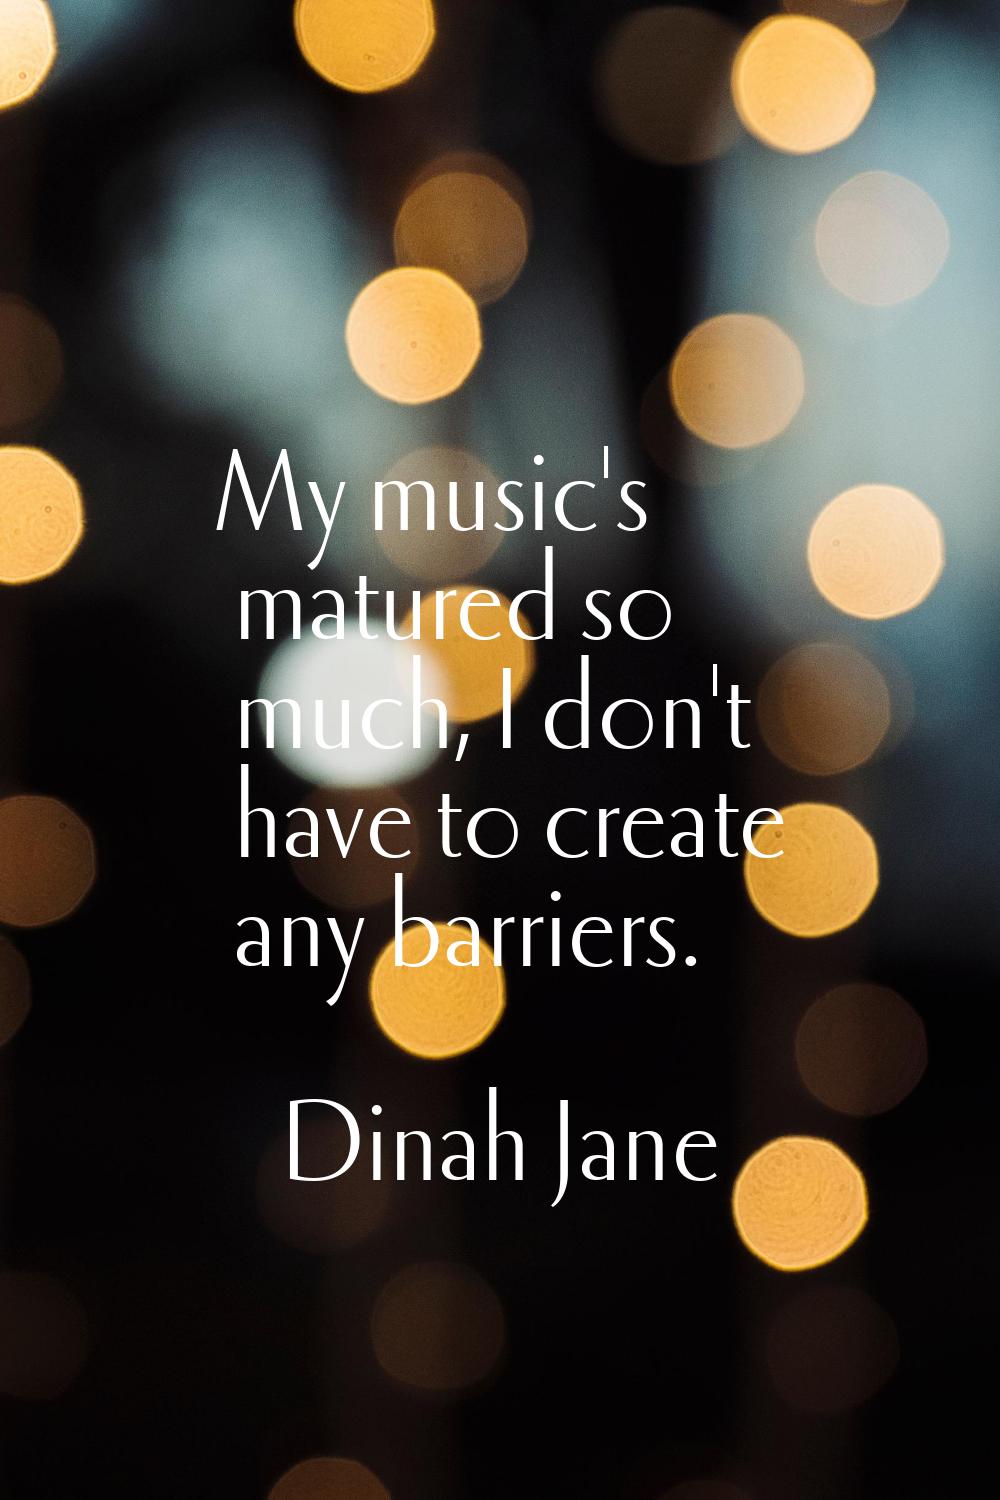 My music's matured so much, I don't have to create any barriers.